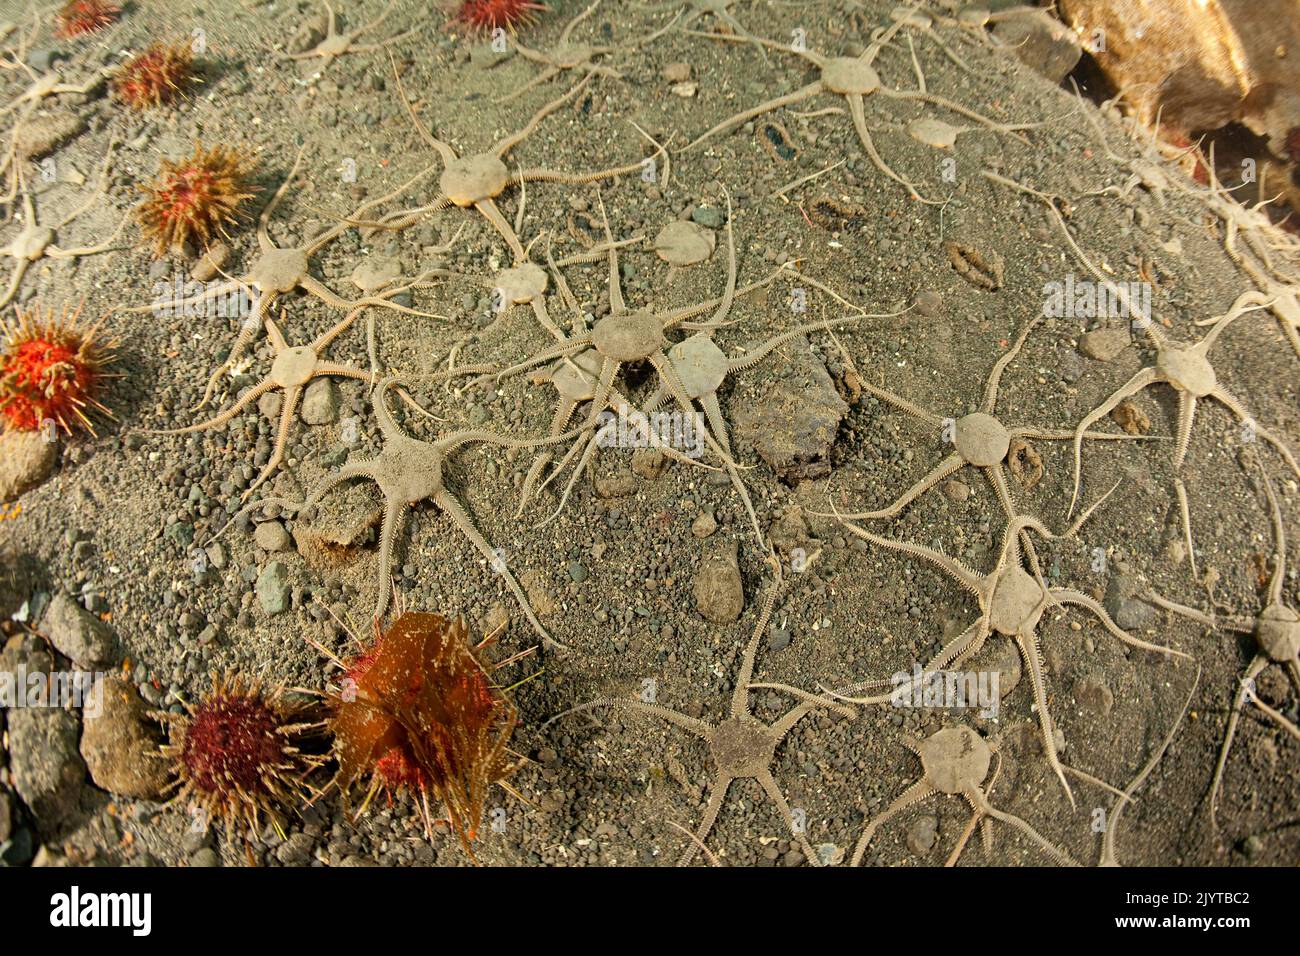 Aggregation of Brittle Star (Ophionotus victoriae) on a sandy bottom, It is a predator and opportunistic generalist and feeds on a wide range of invertebrates, especially krill. Antarctic Peninsula, Antarctica Stock Photo